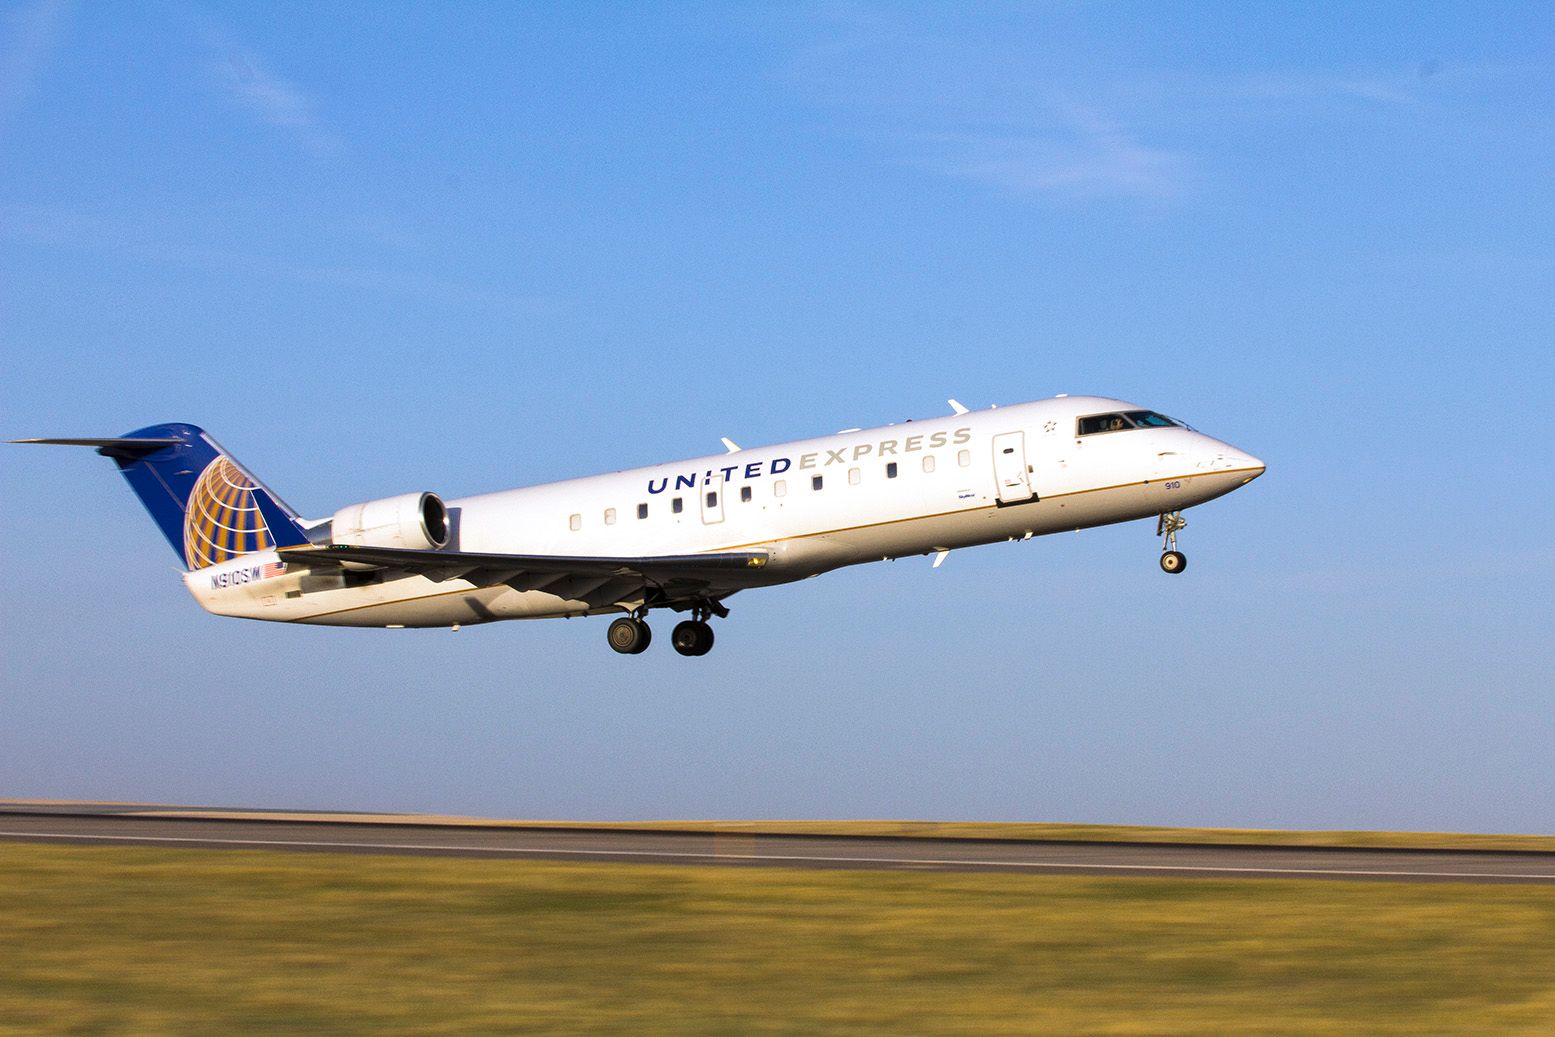 United Express at Southwest Wyoming Regional Airport